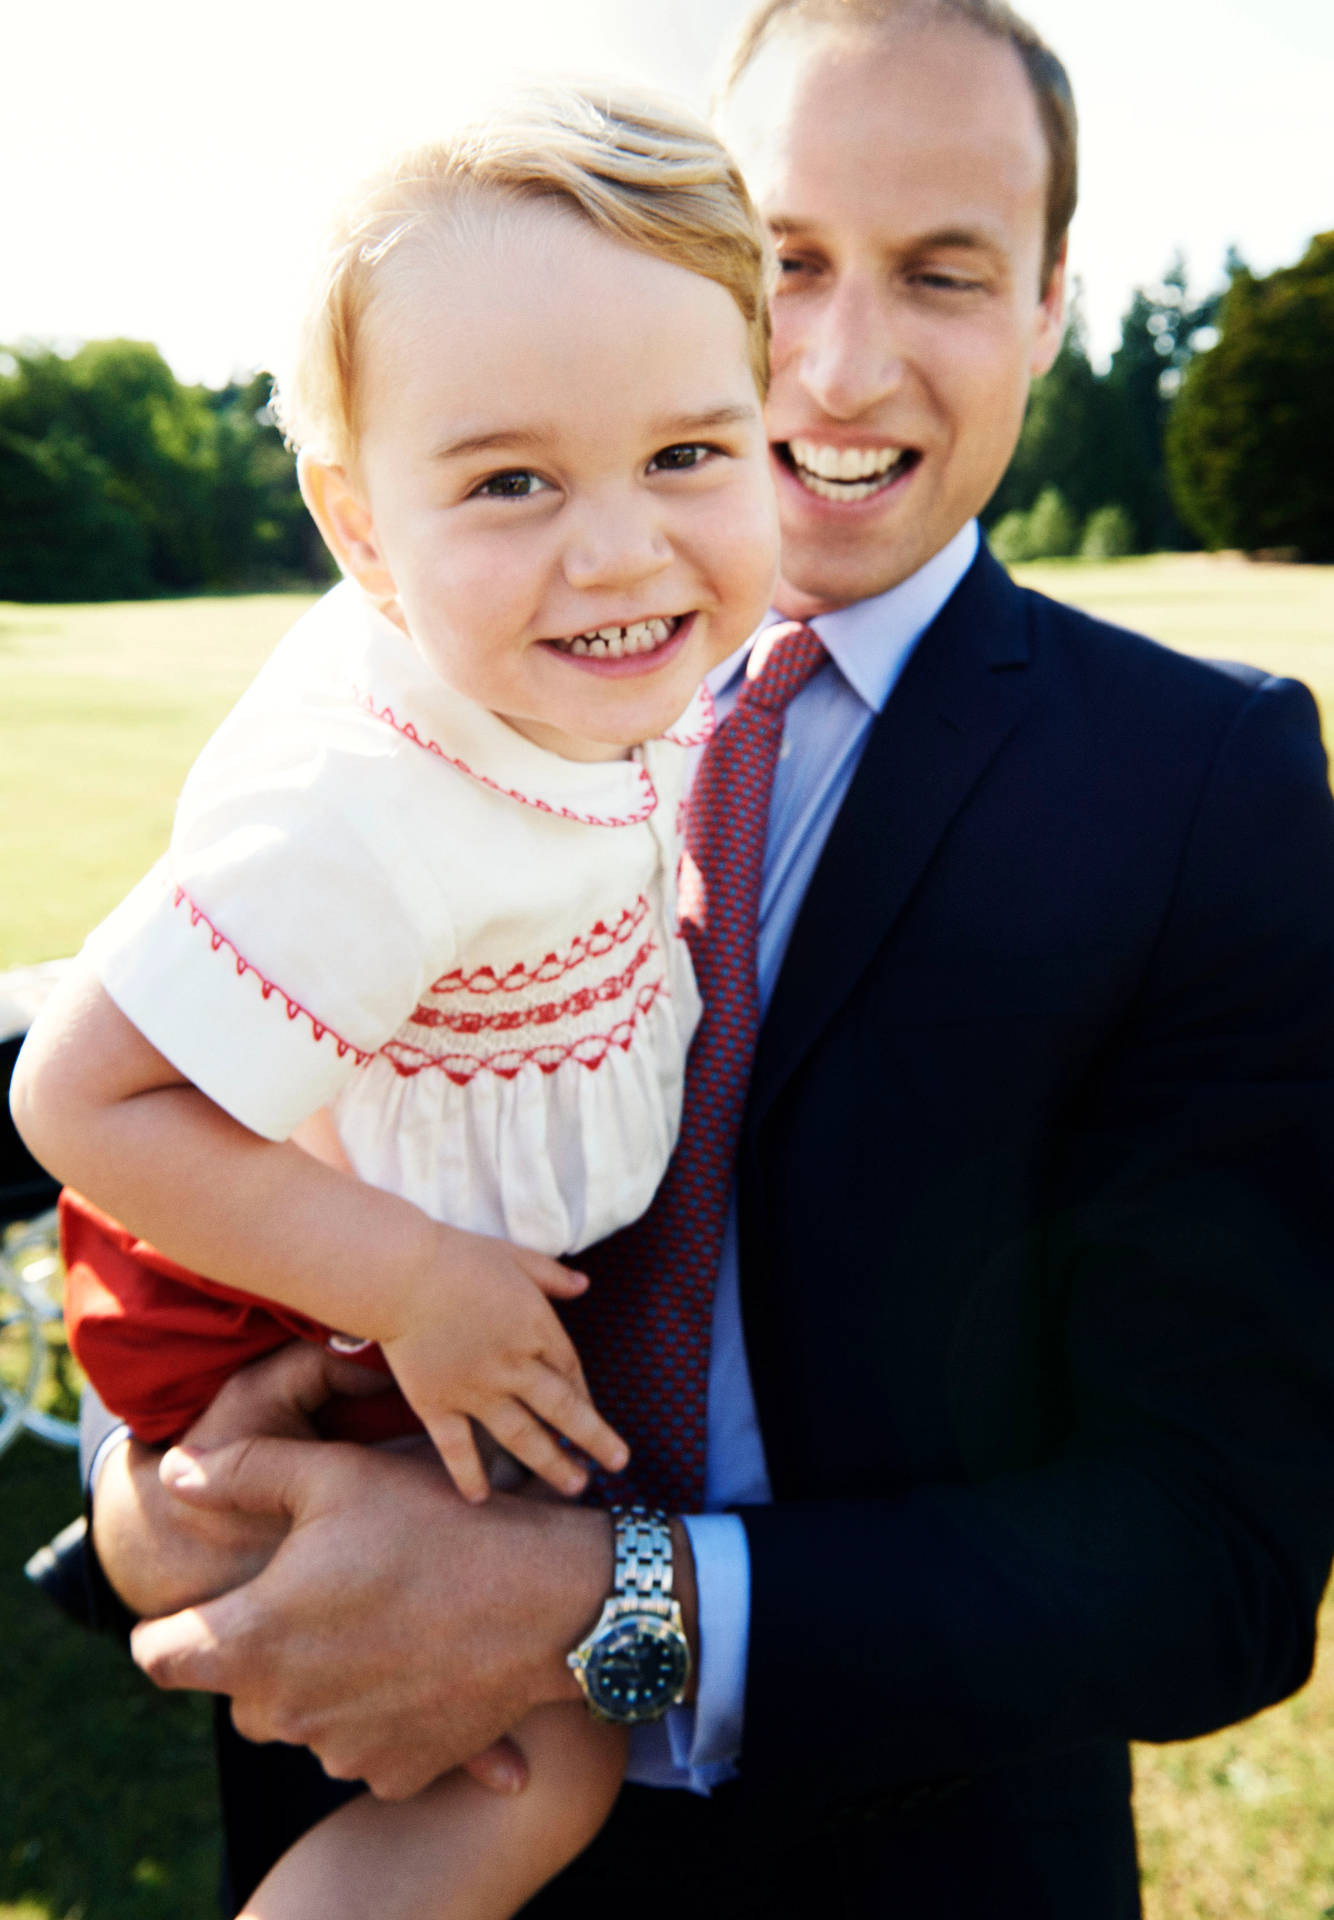 Prince William Carrying Prince George